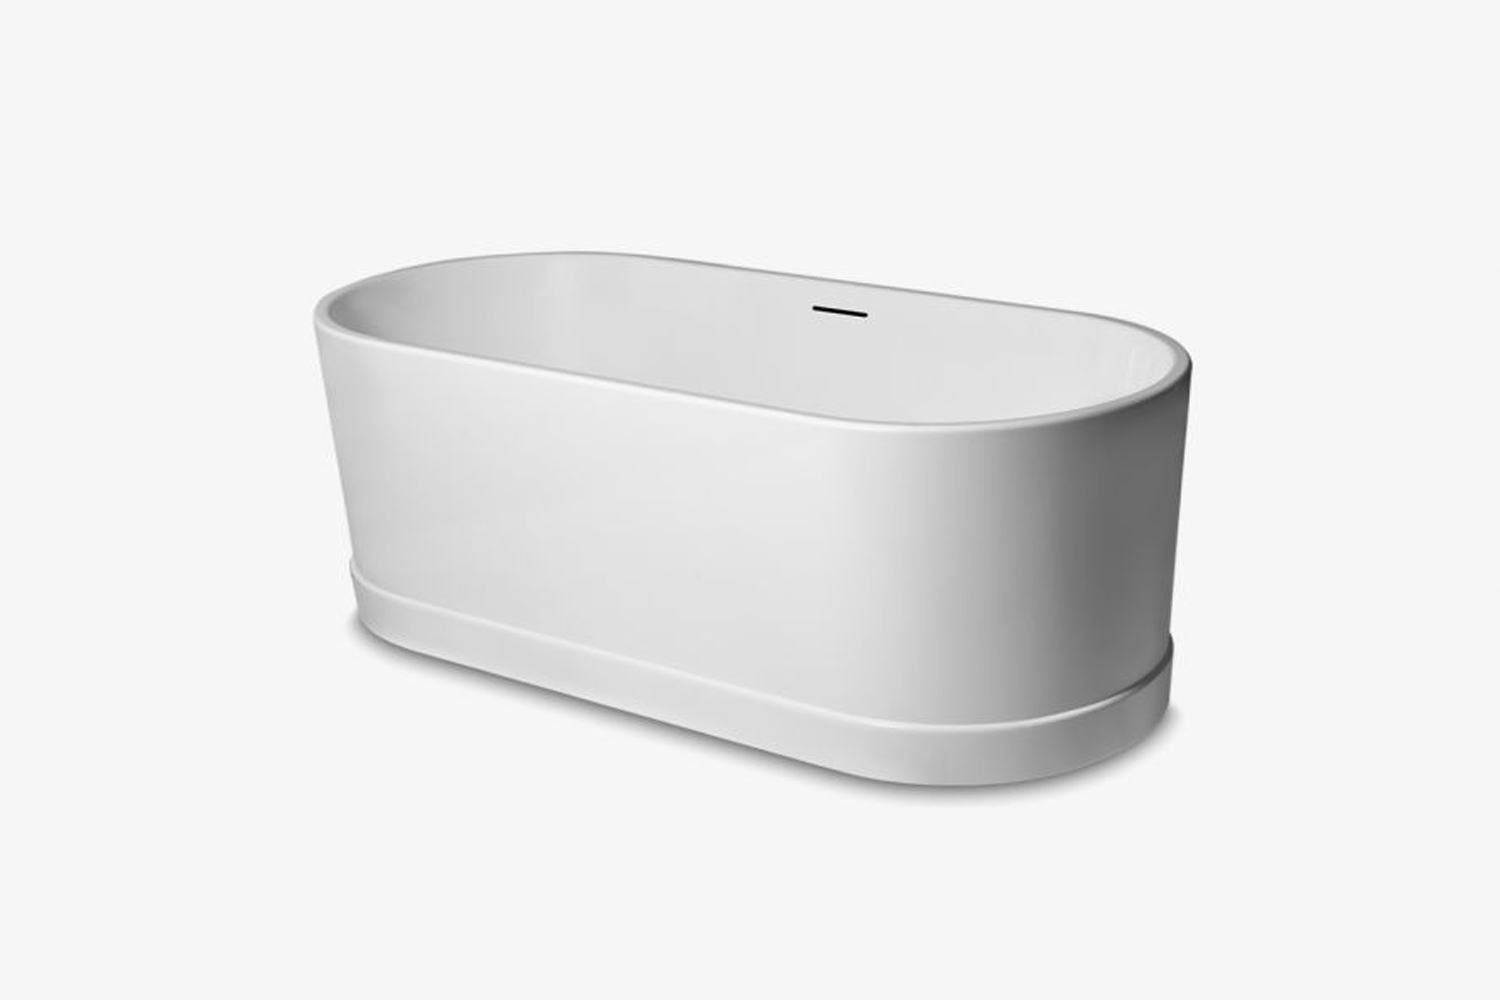 the waterworks arcos freestanding bathtub is a double ended fiberglass tub with 17